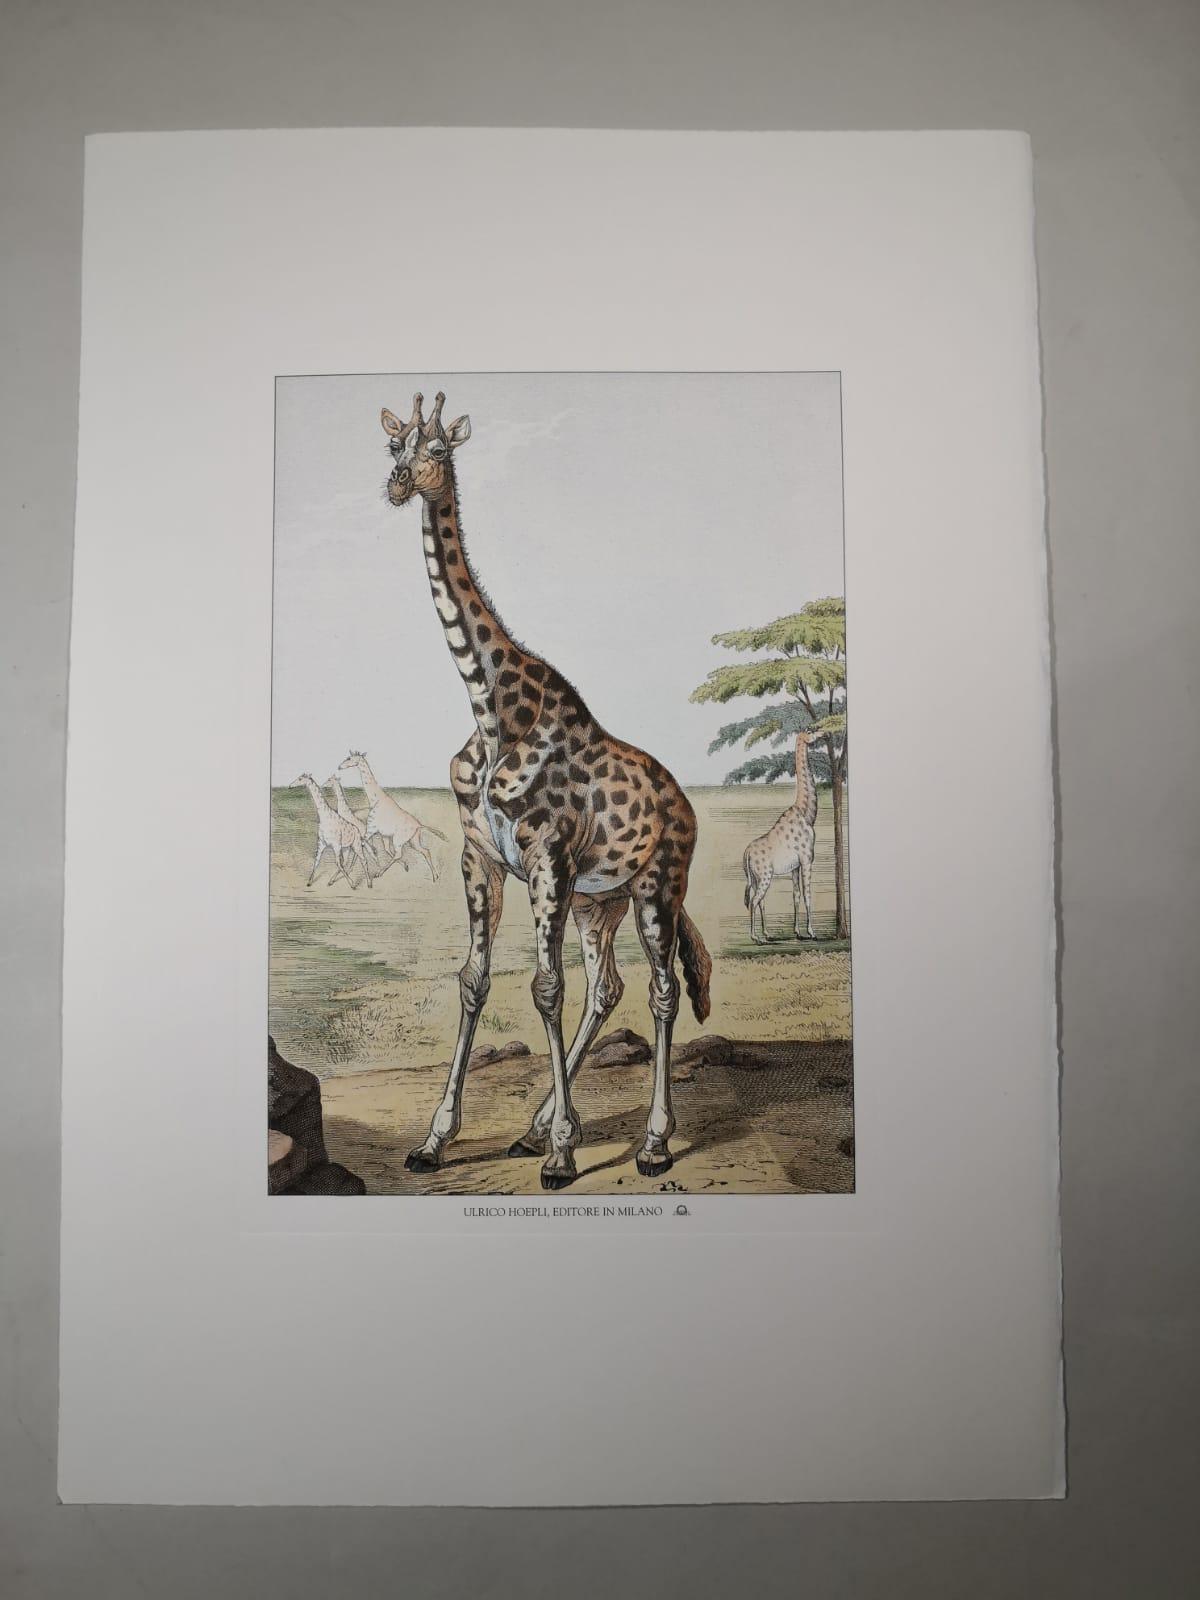 Print from a Collection of three faunistic prints: 
- Tiger an Jaguar
- Elephant
- Giraffe
Printed manually on 100% cotton engraving paper in Florence Italy.
Each print is entirely painted by hand with water colors and tempera, with a beautiful